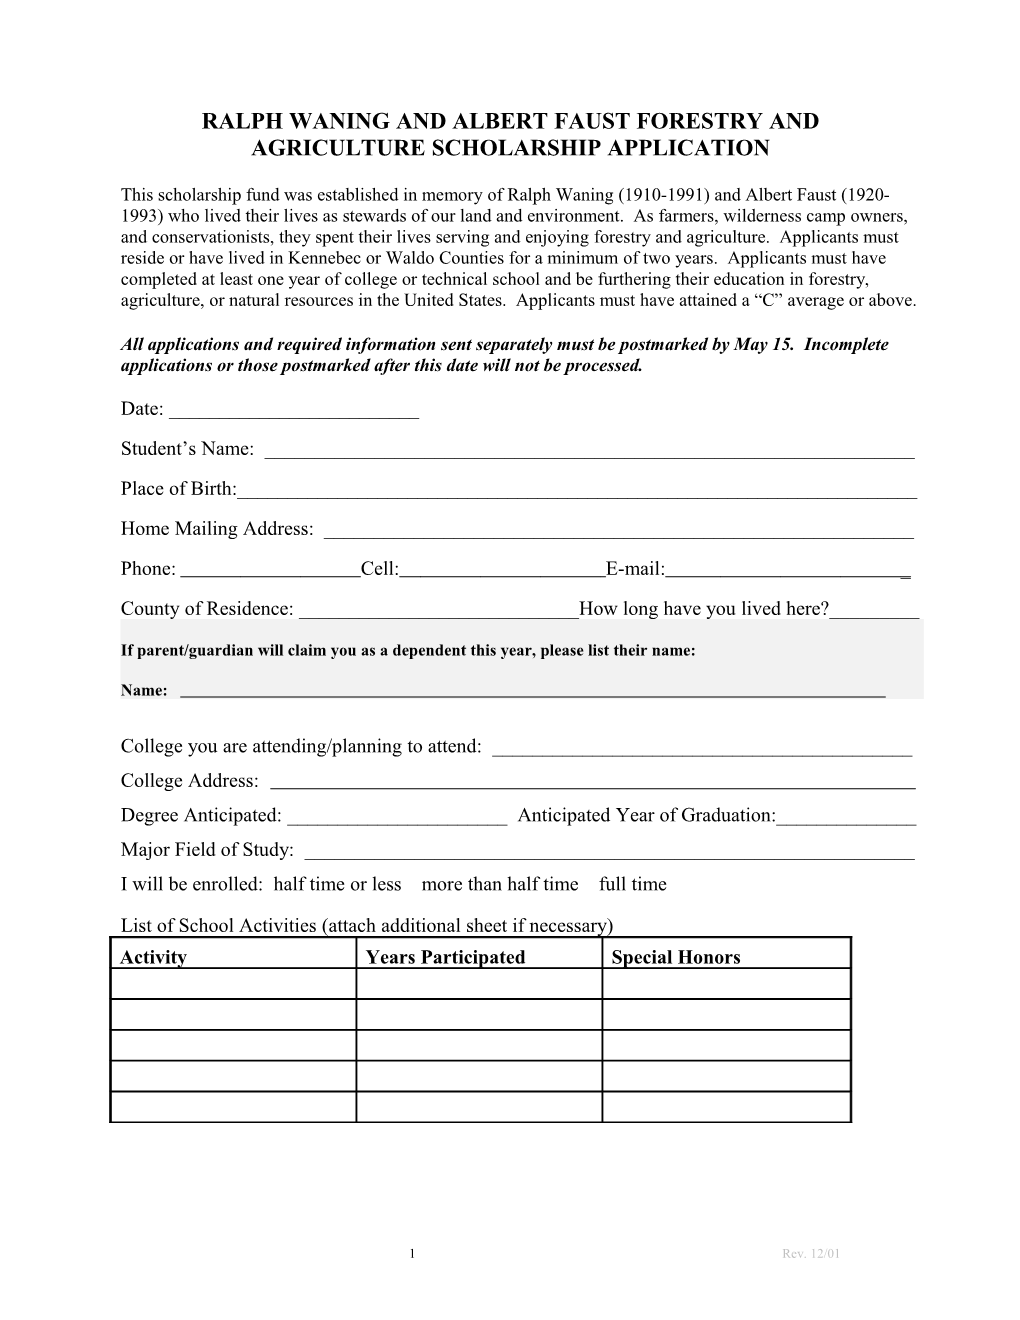 Ralph Waning and Albert Faust Forestry and Agriculture Scholarship Application